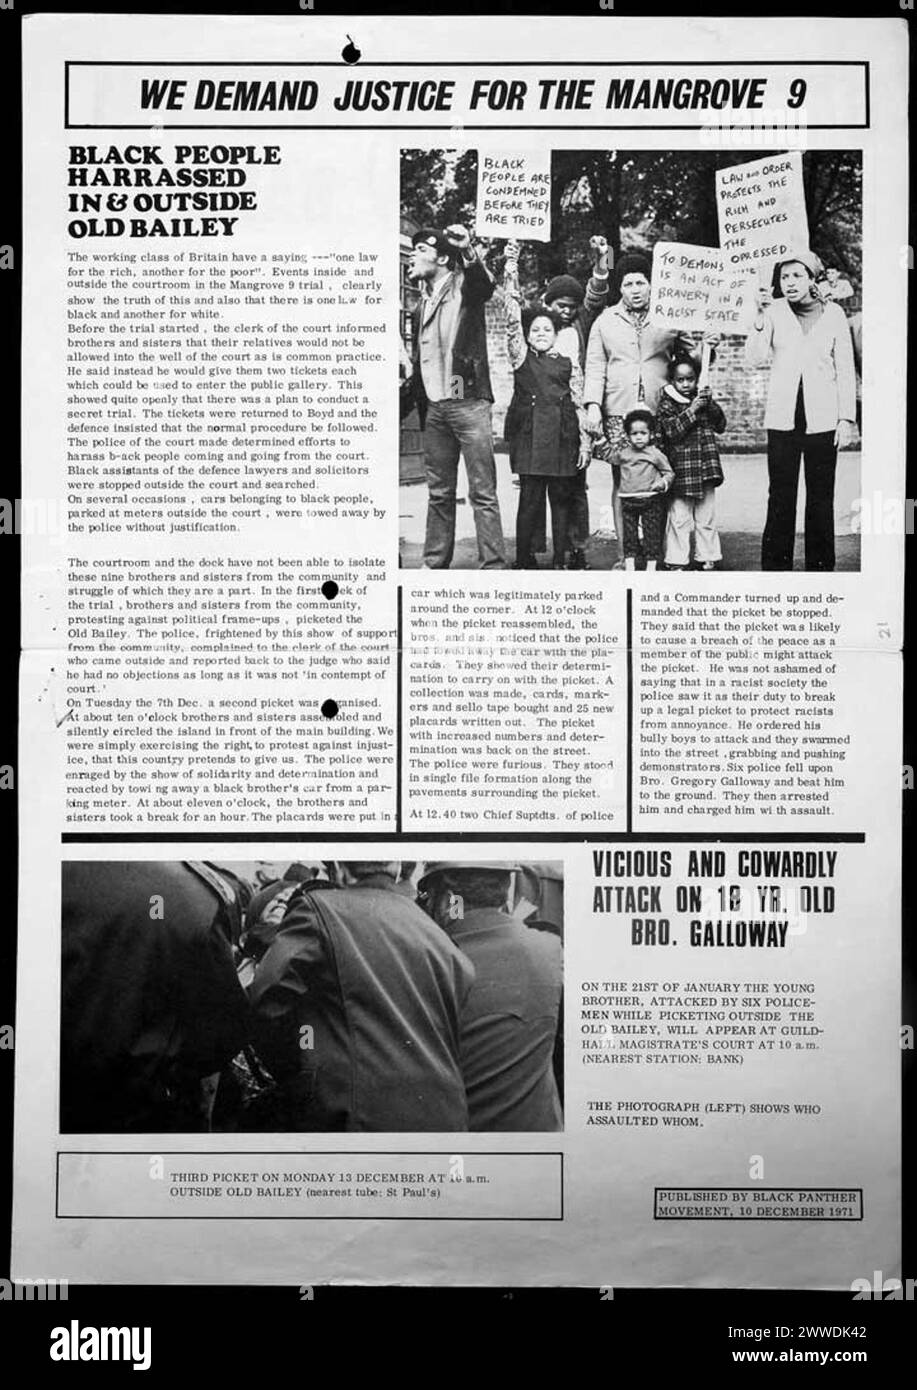 Mangrove Nine flyer Catalogue reference: HO325/143 (3) These flyers view the demonstration as a wider reaction against unfair treatment of the black community, citing the murder of David Oluwale in Leeds. The flyer also documents silent pickets outside the courts, and advertises a third to take place outside the Old Bailey. Stock Photo